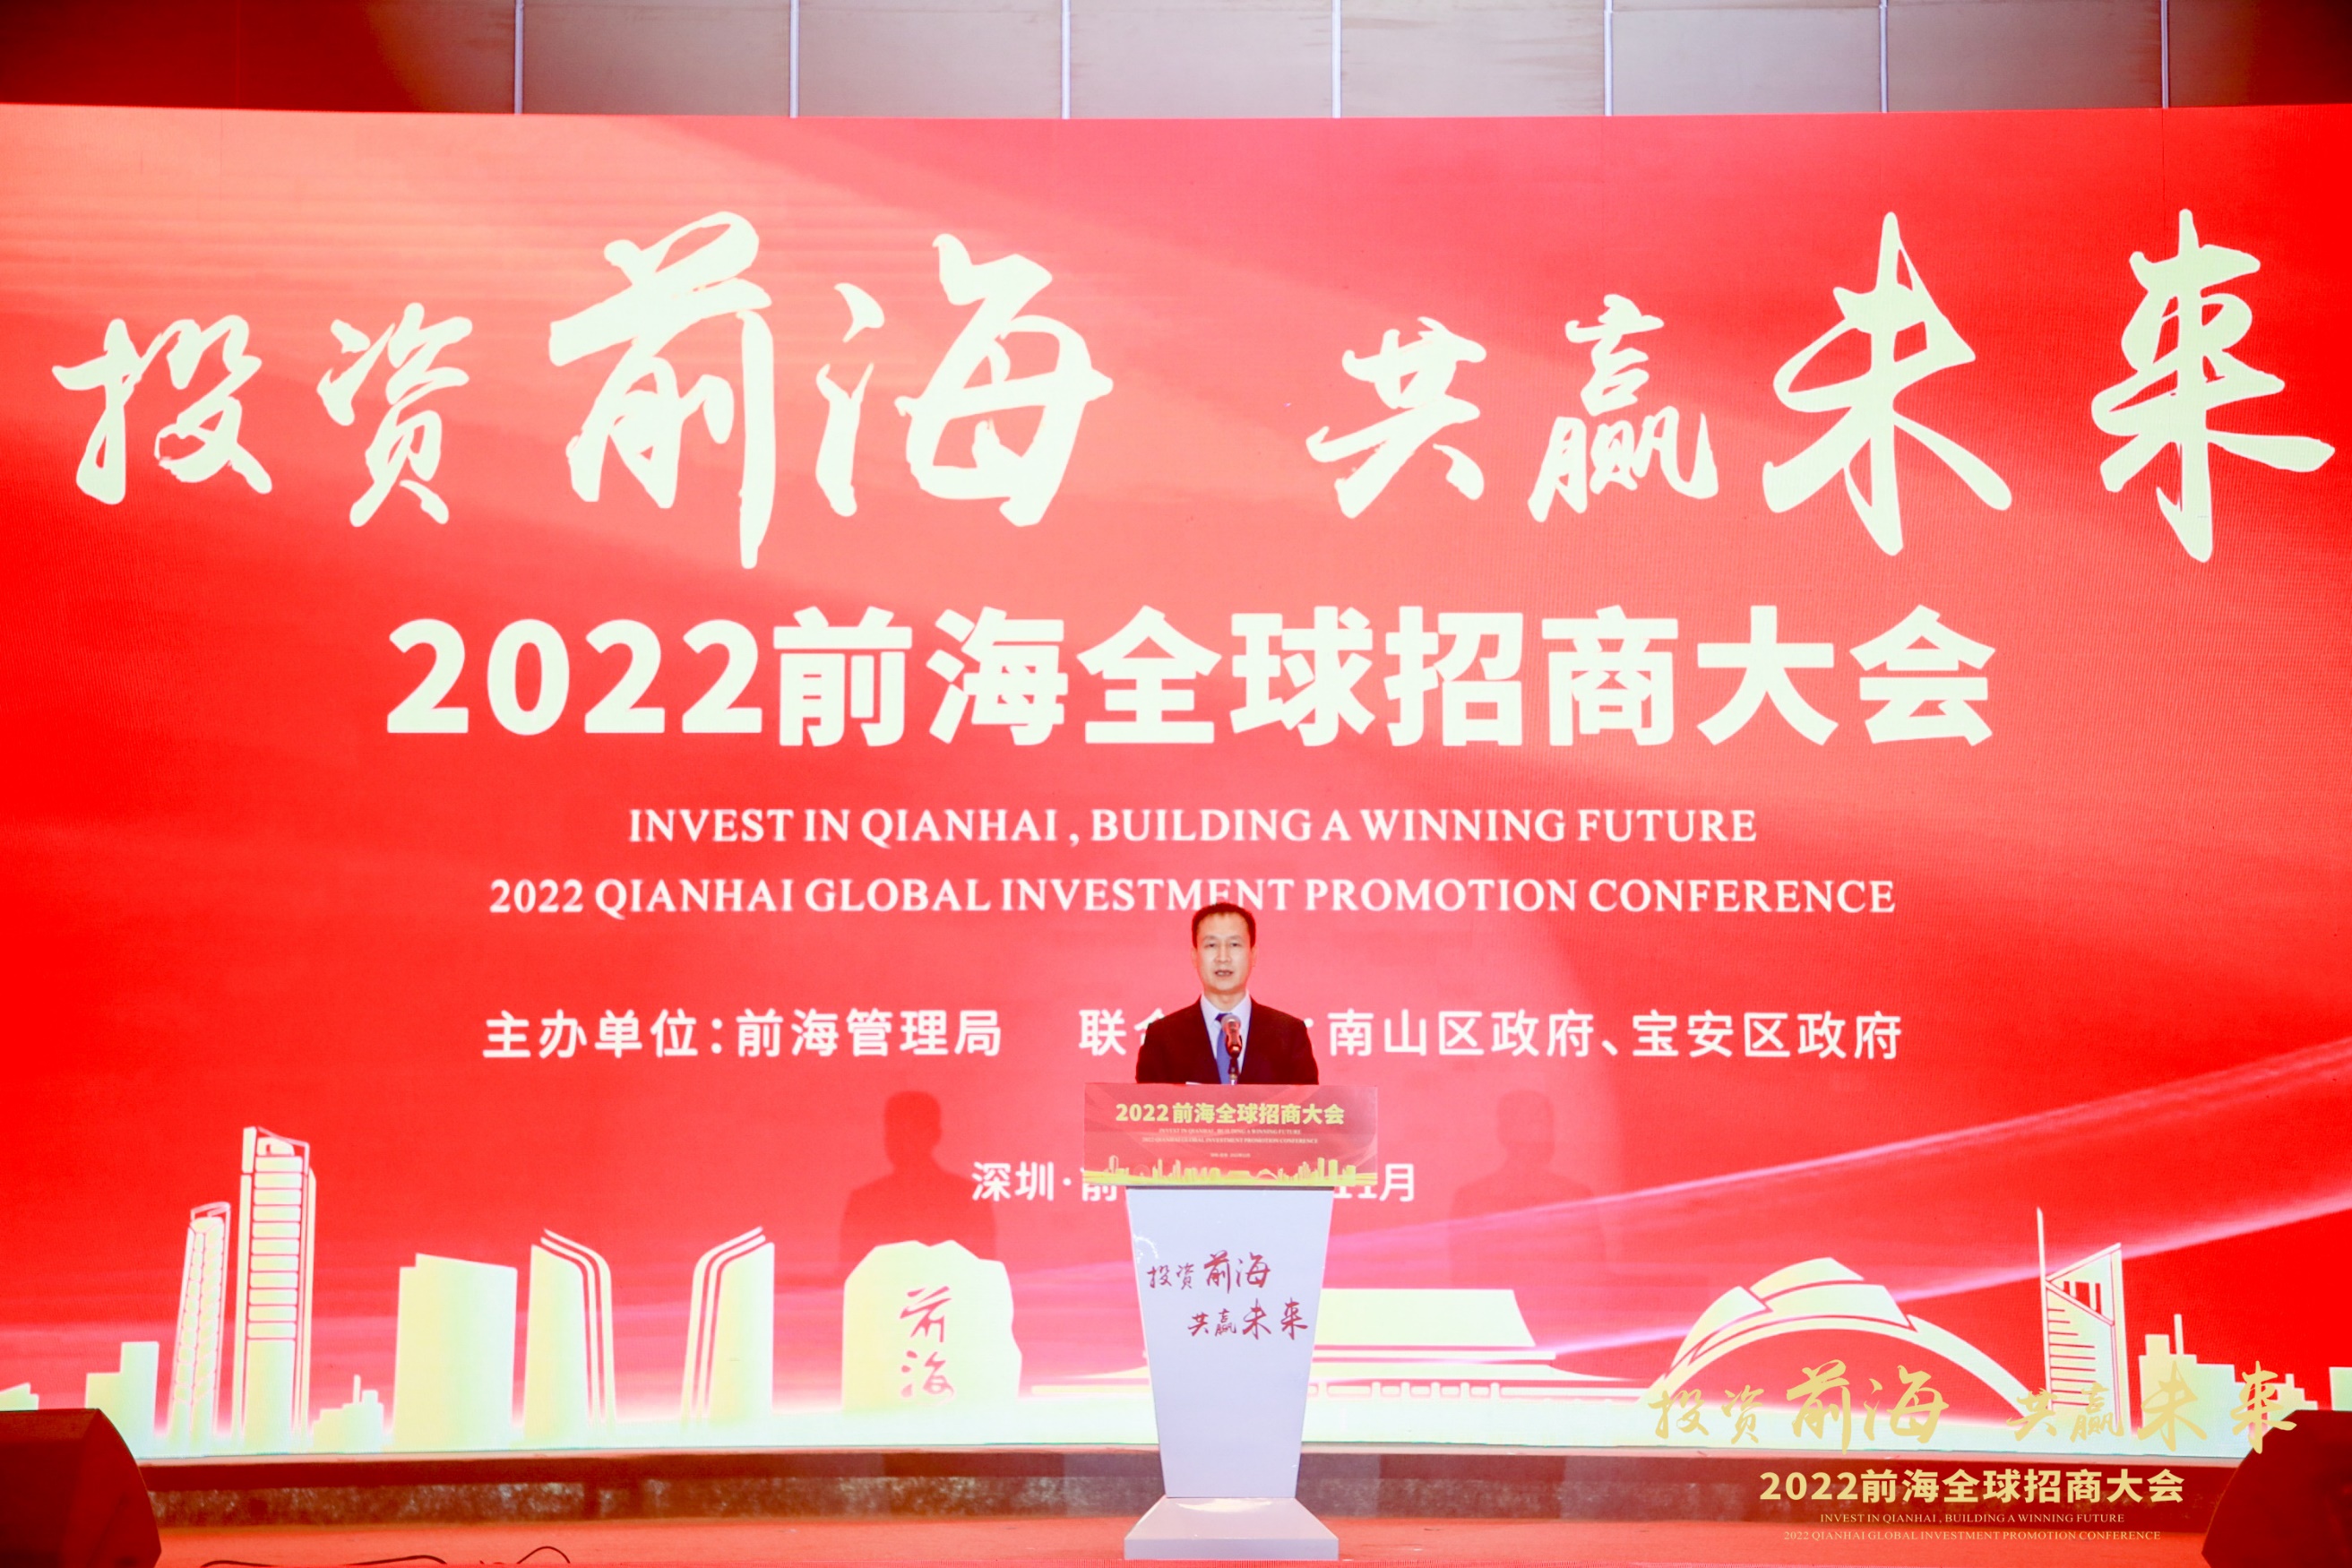 Zeng Pai, a member of the Standing Committee of the Shenzhen Municipal Committee of the CPC, director of Qianhai Authority and secretary of the Party Nanshan District Committee, gave out a speech at the 2022 Qianhai Global Investment Promotion Conference